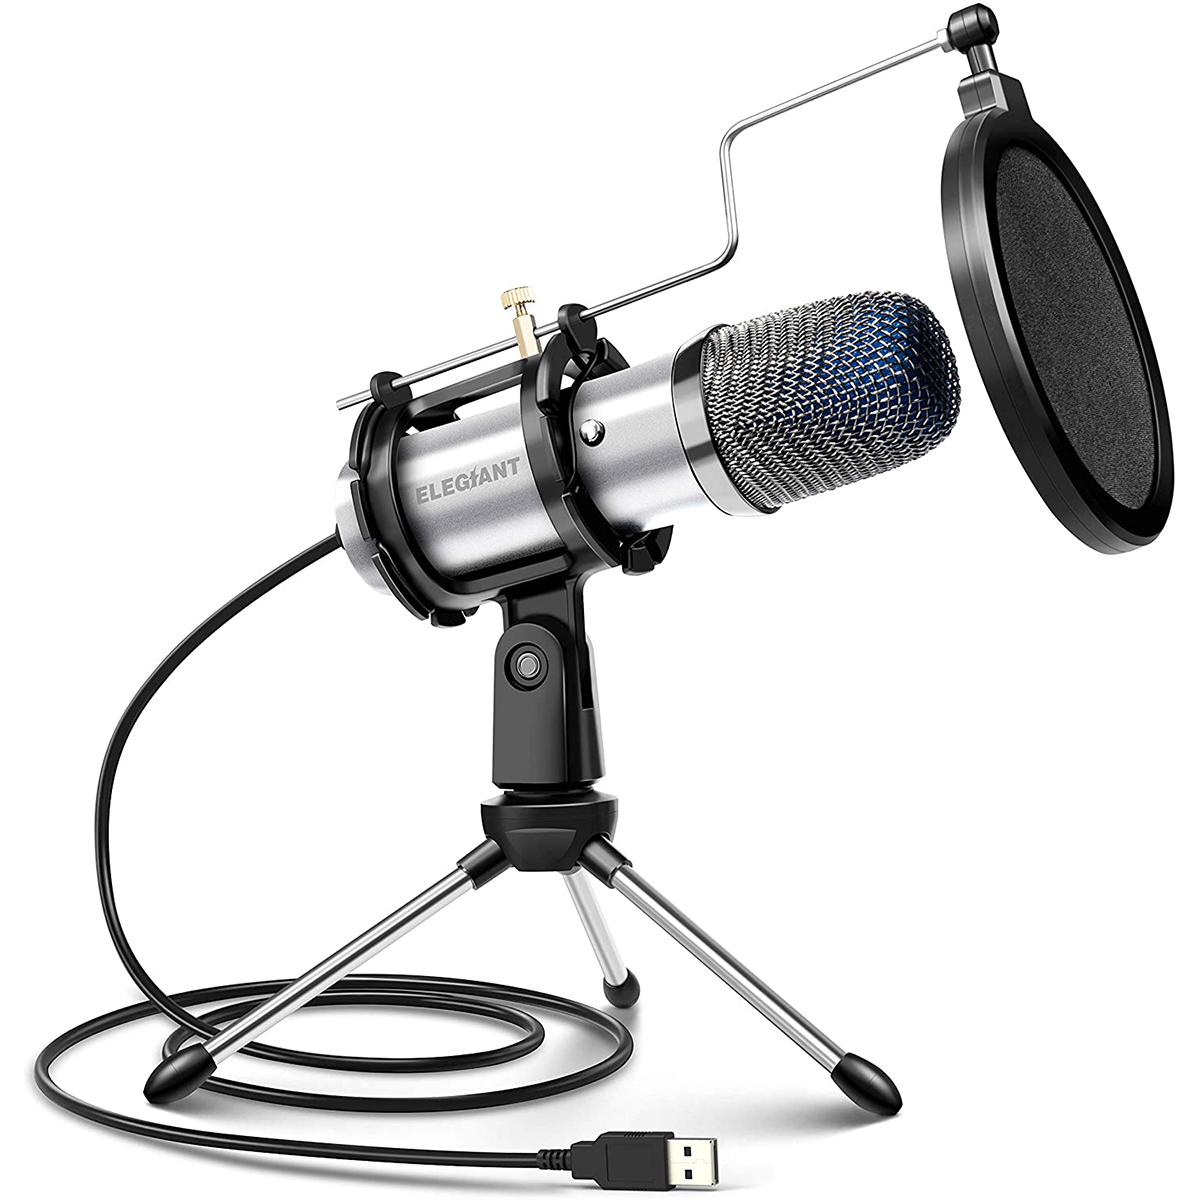 Find ELEGIANT EGM-04 Computer Microphone USB Wired Condenser Gaming Microphone with Tripod Stand & PopFilter Desktop Mic for PS4 PC Zoom Skype Youtube Podcasting Compatible with iMAC Windows for Sale on Gipsybee.com with cryptocurrencies